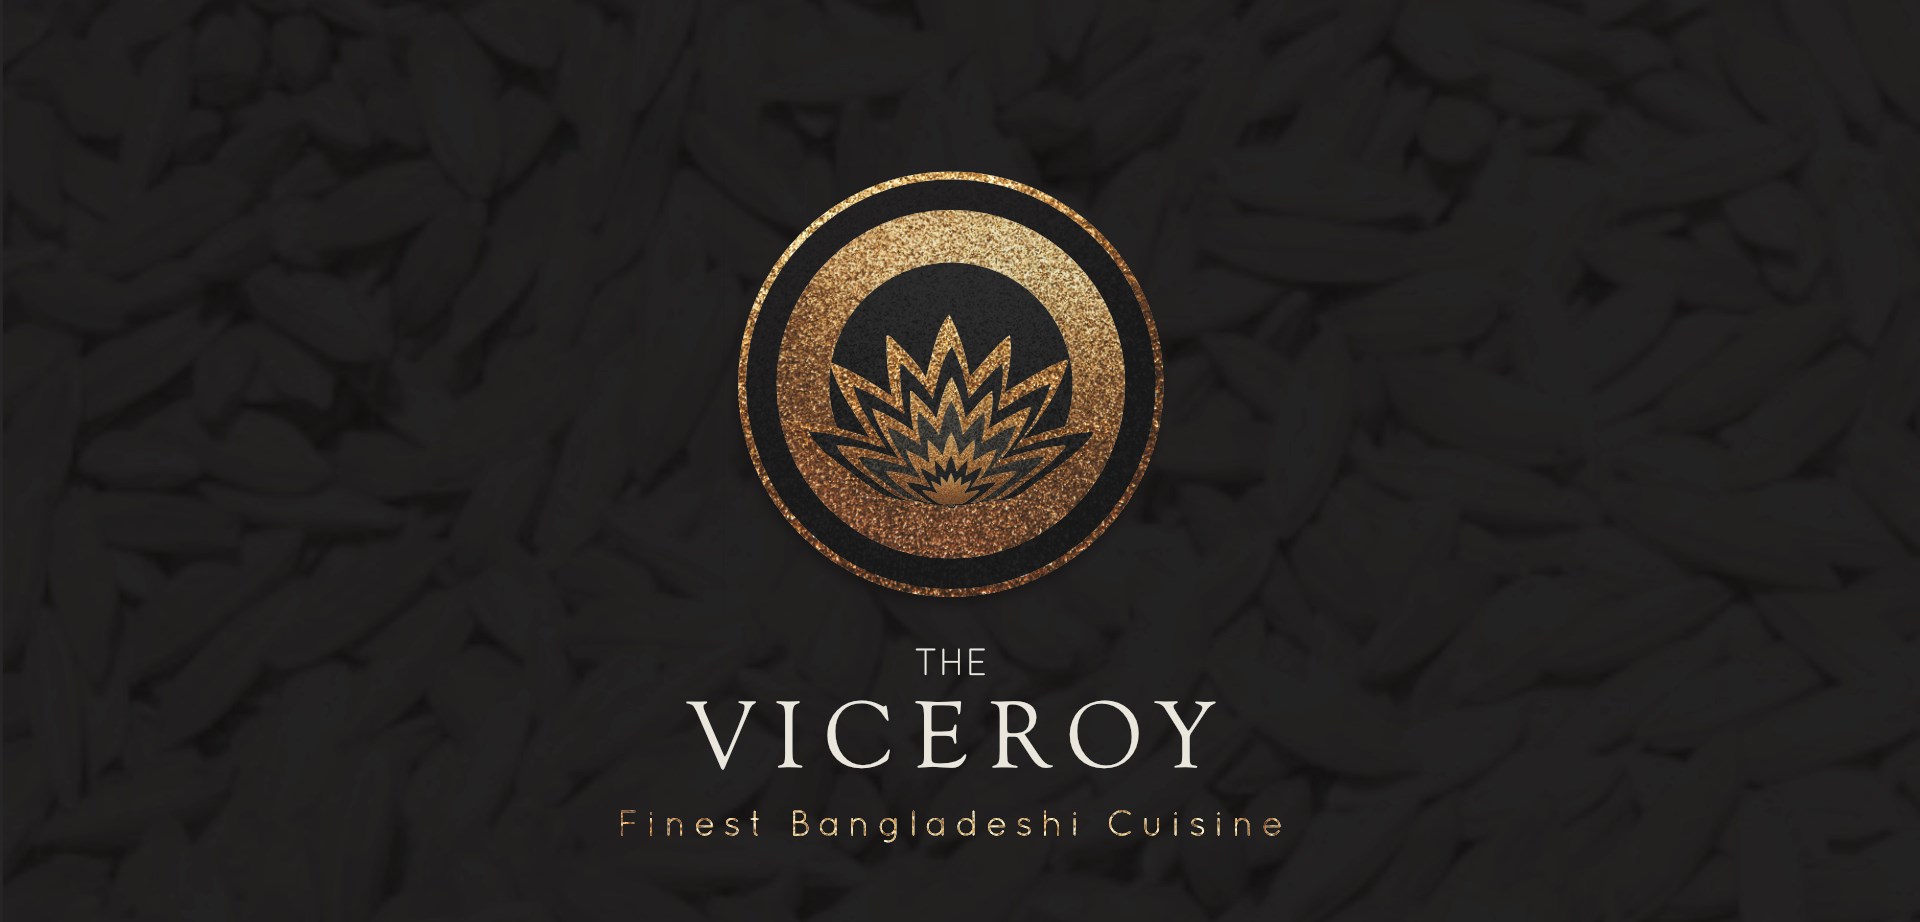 The Viceroy Indian Restaurant in Carlisle